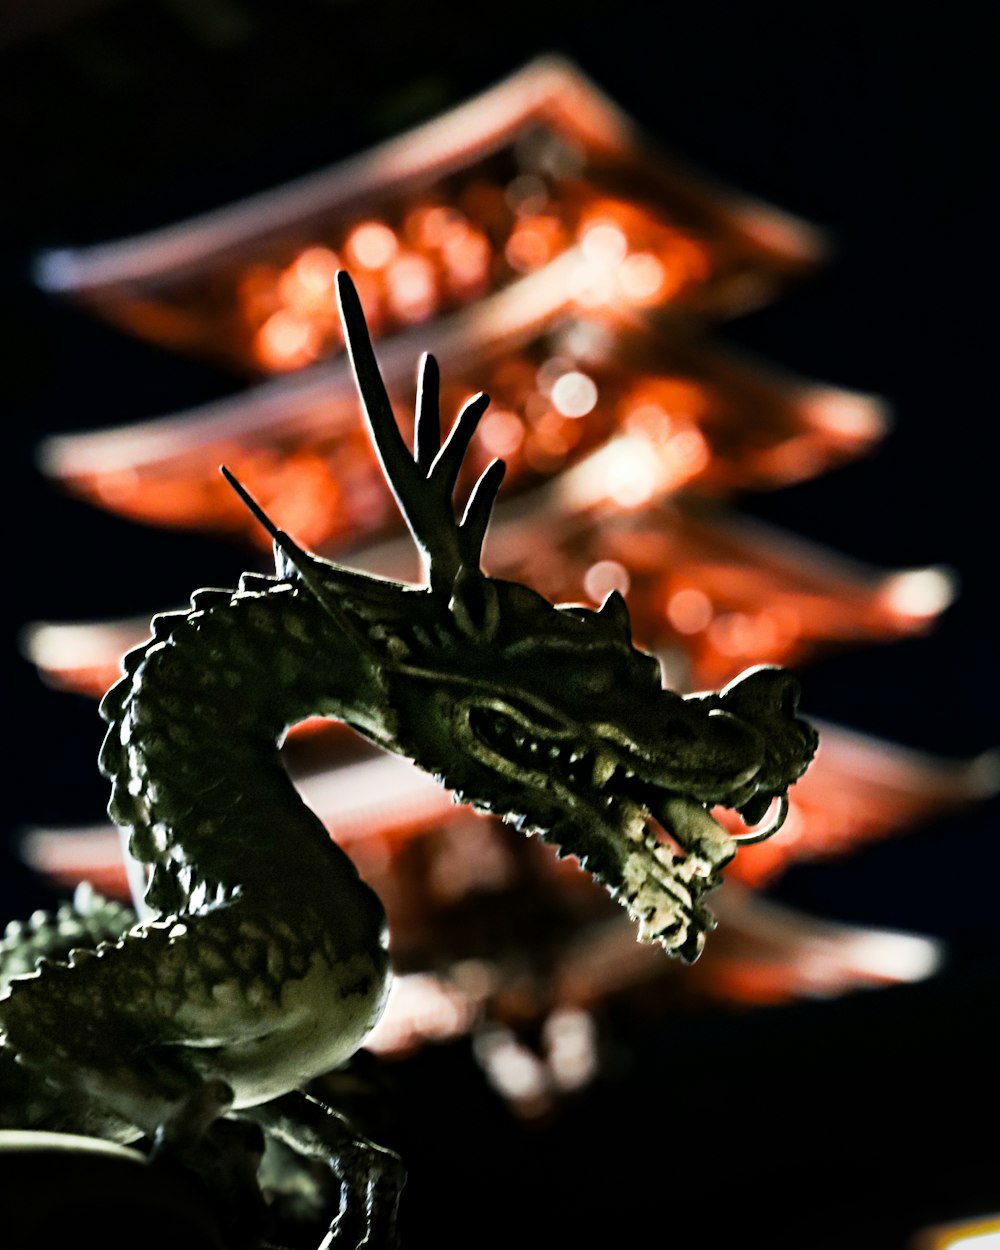 brown dragon figurine in close up photography